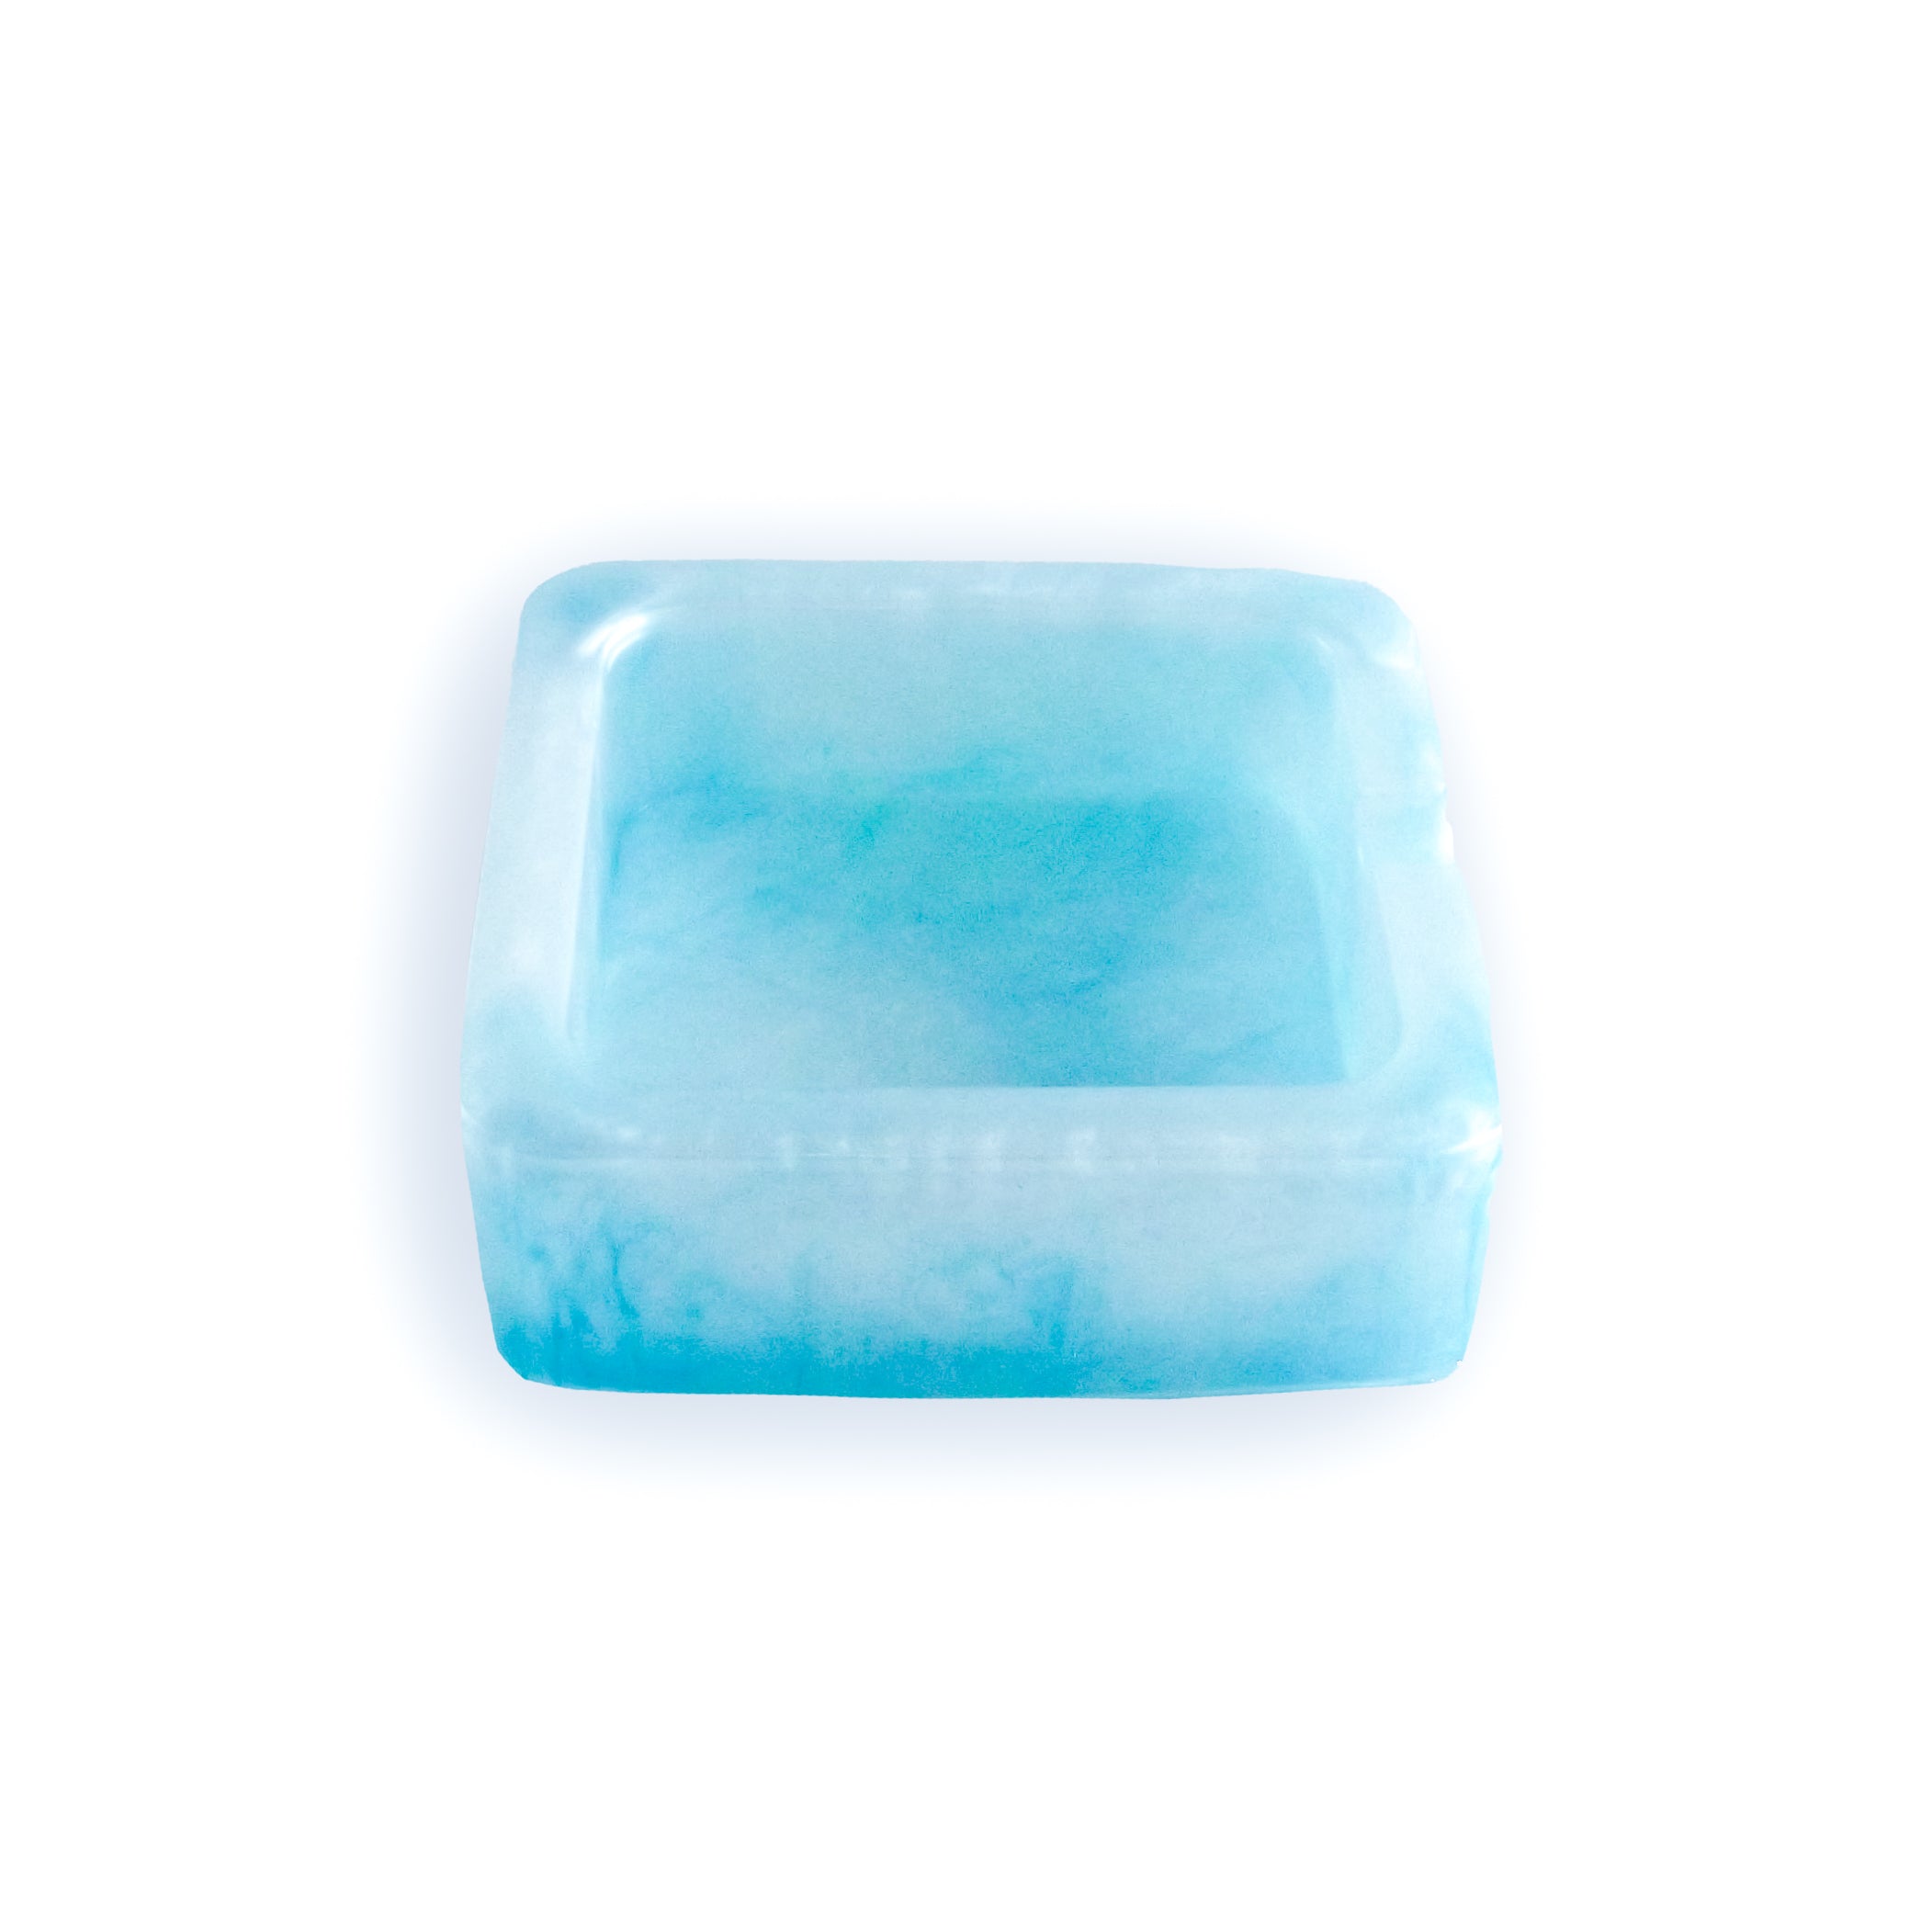 Image of a blue and white CanEmpire resin ashtray from CanArt collection. This handcrafted piece made of eco-friendly resin offers heat protection as well as unmatched style & durability.